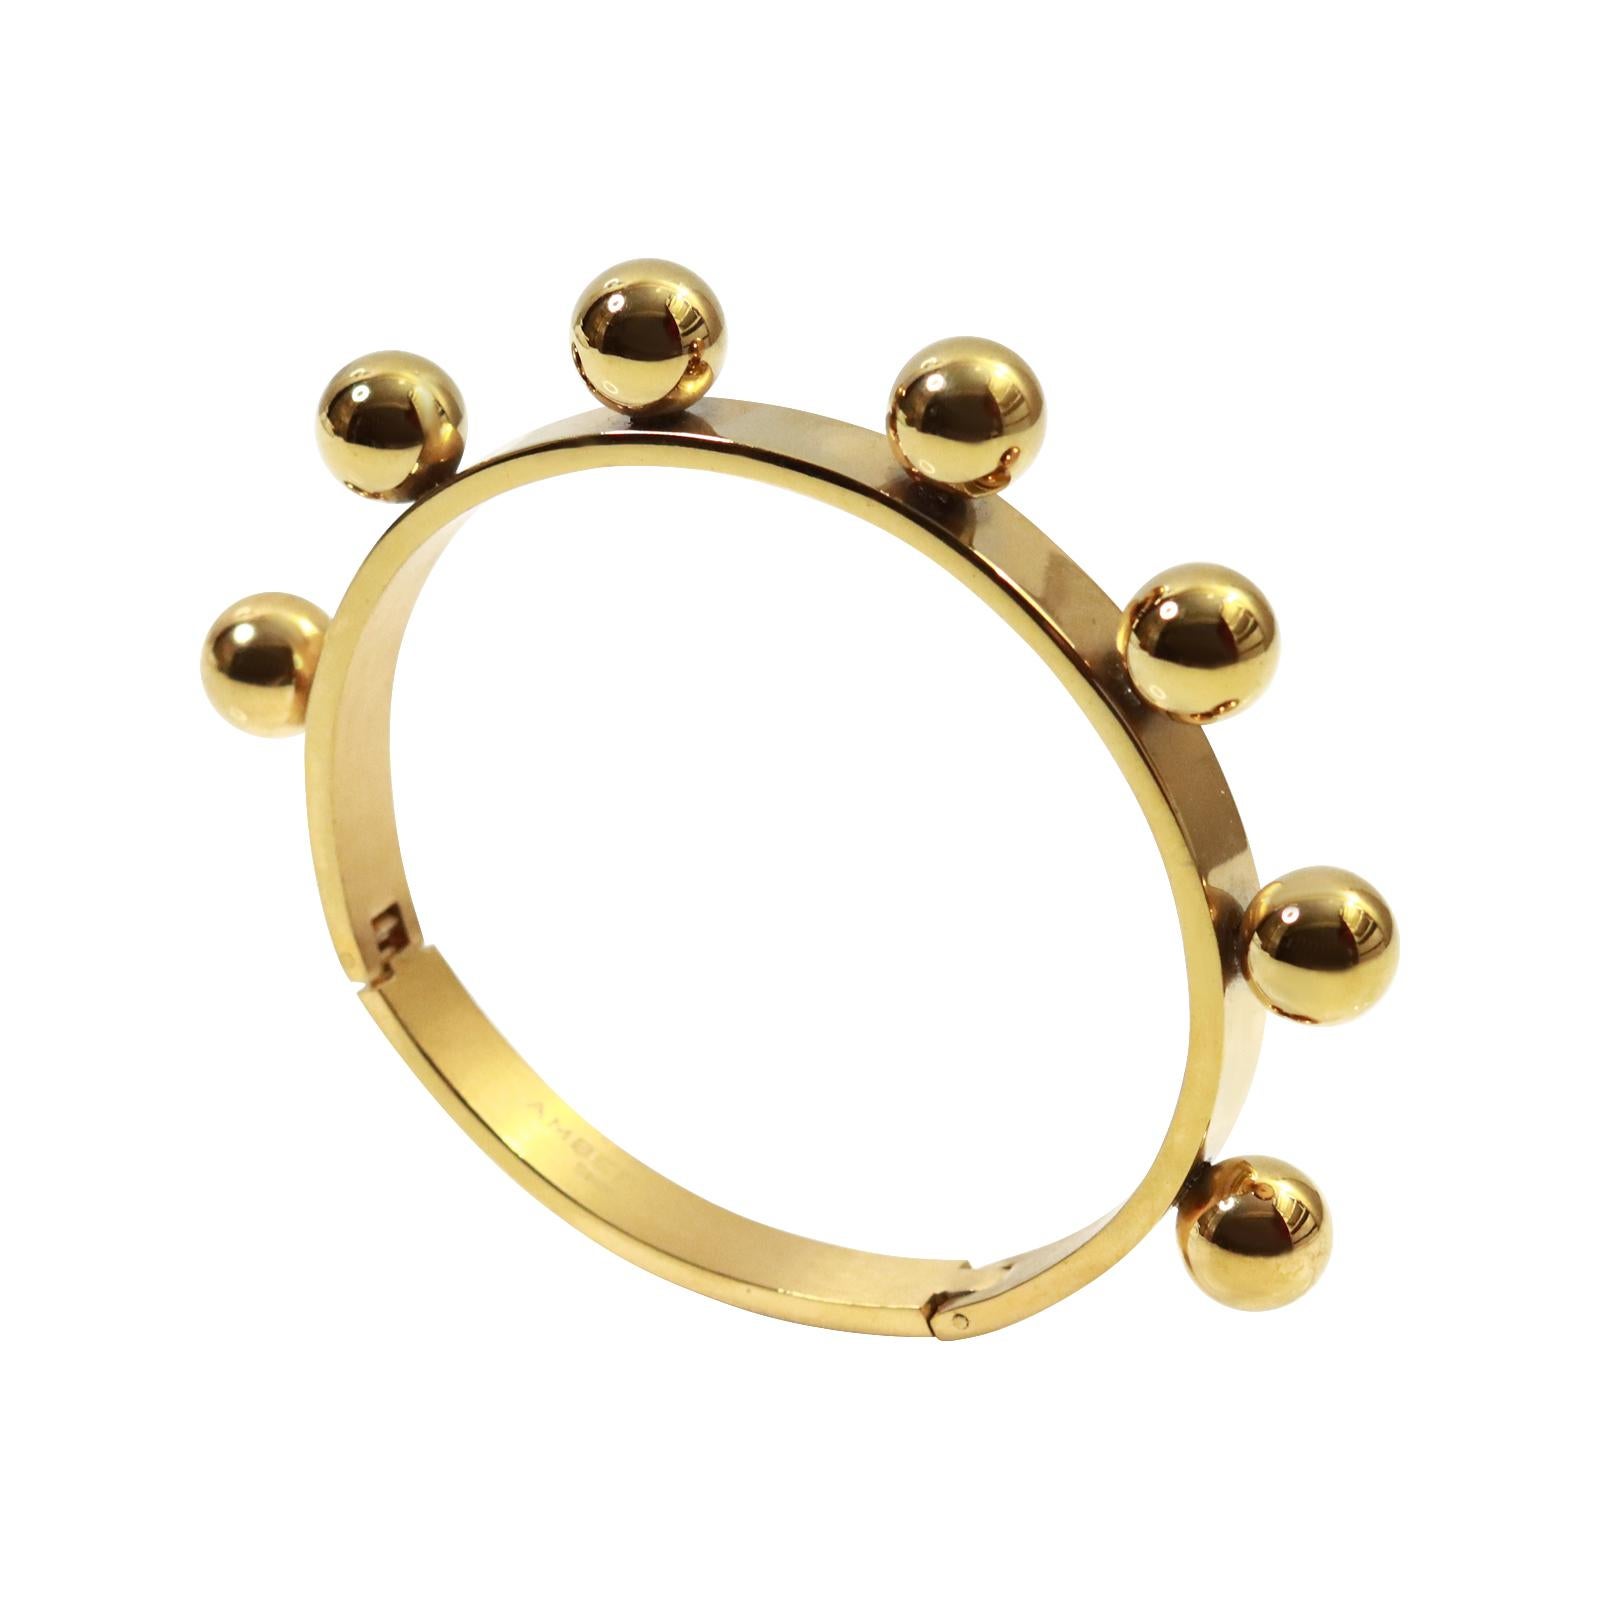 Vintage Gold Tone Heavy Bracelet With Fixed Balls Circa 1990s For Sale 1